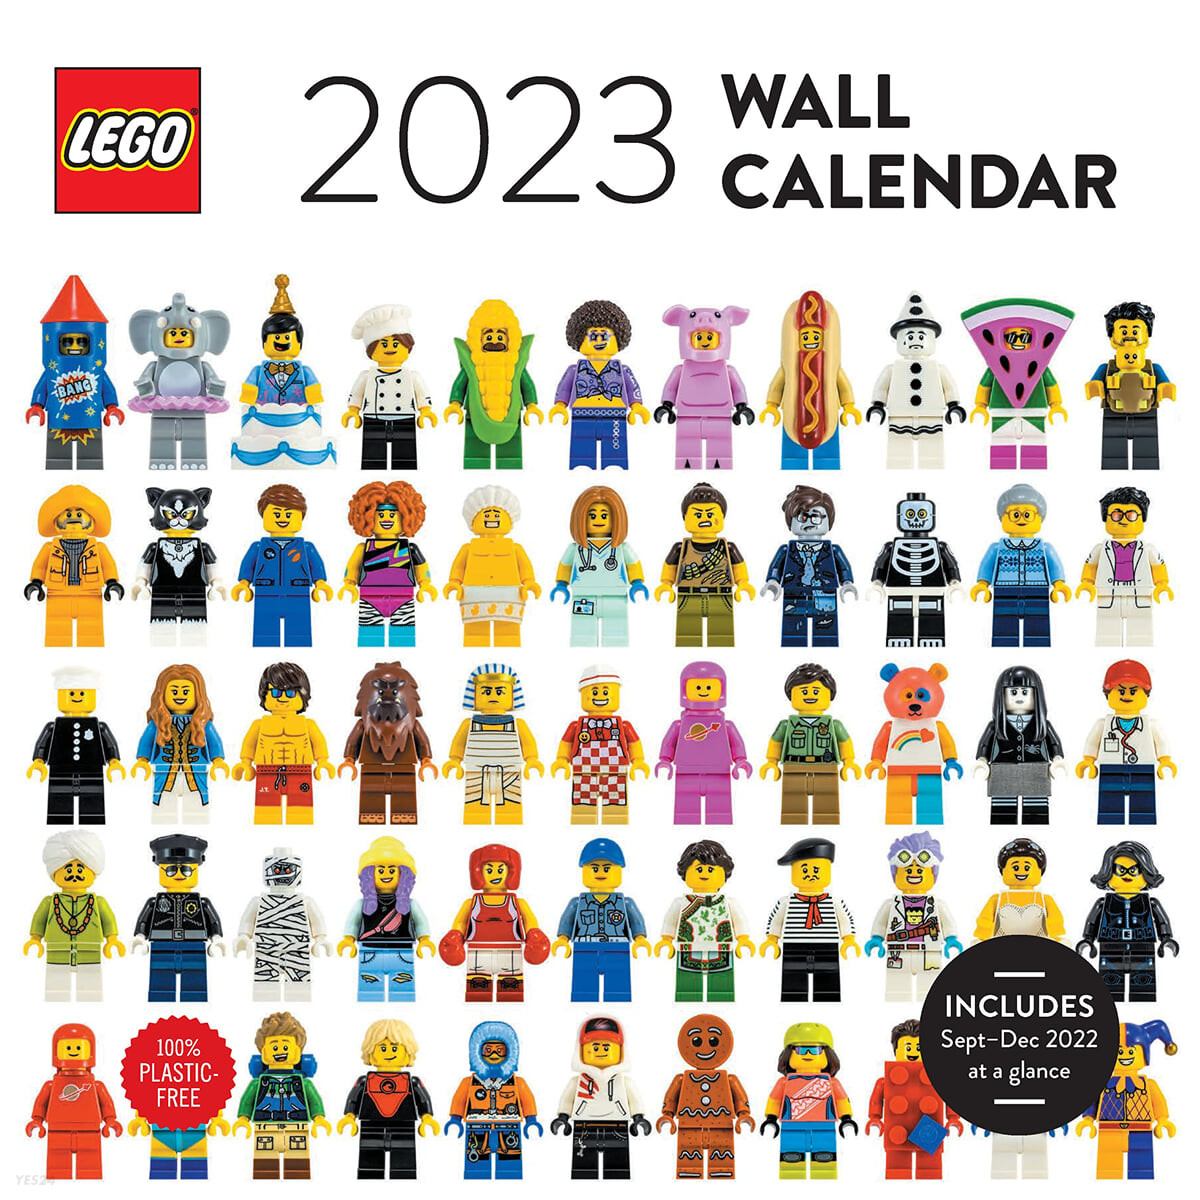 2023 Wall Calendar: LEGO (How to Have Important, Brave, Life-Changing Conversations about Race and Racism)